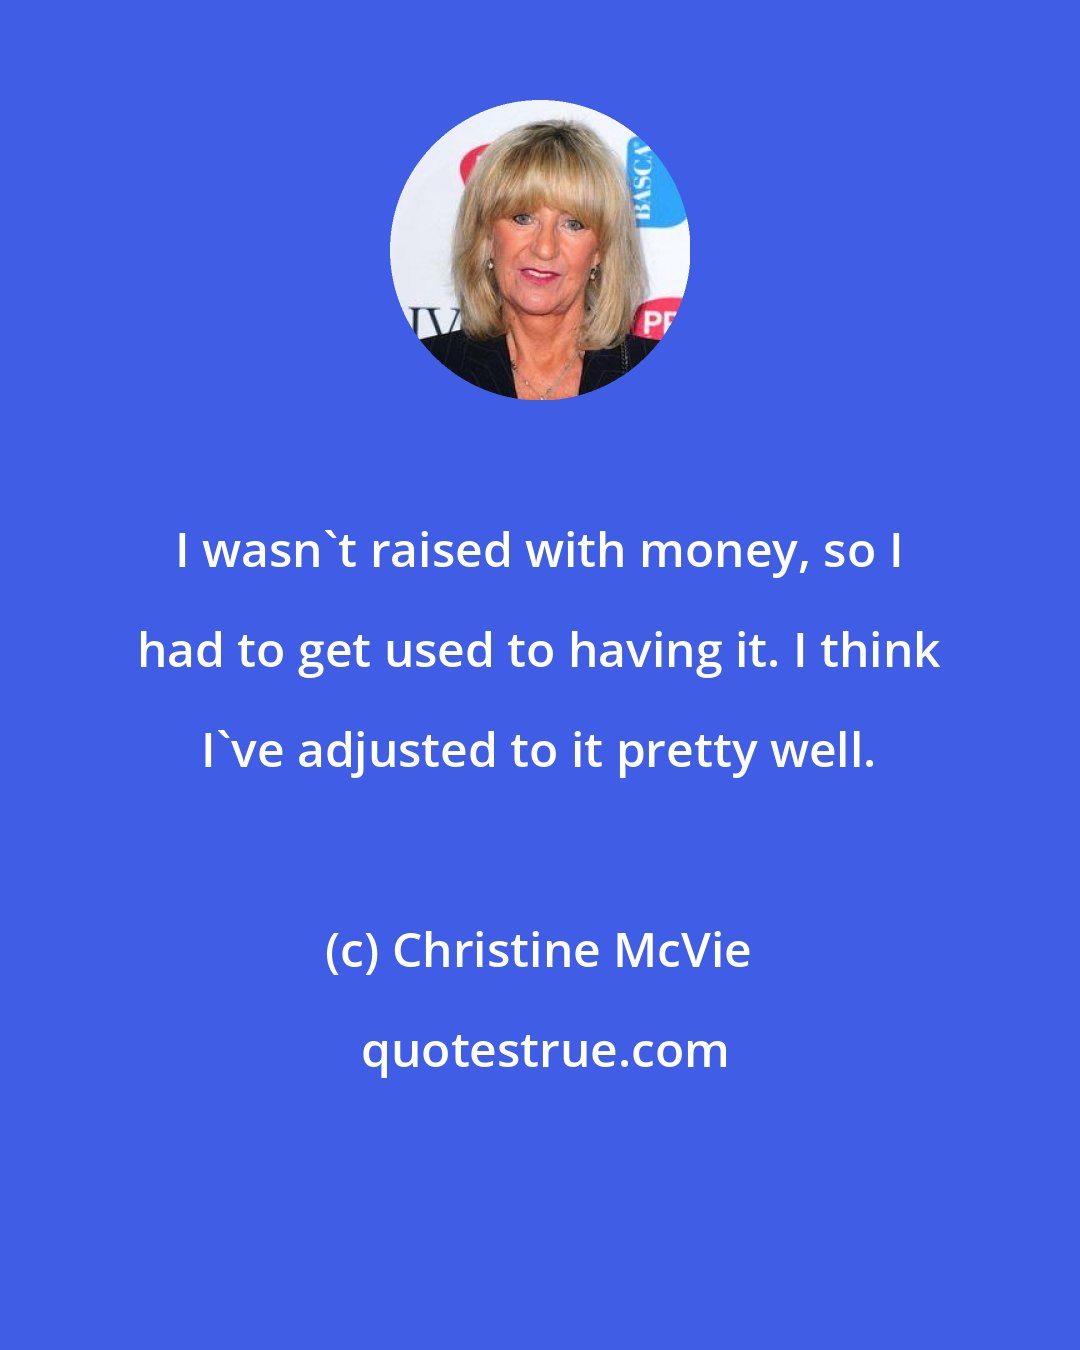 Christine McVie: I wasn't raised with money, so I had to get used to having it. I think I've adjusted to it pretty well.